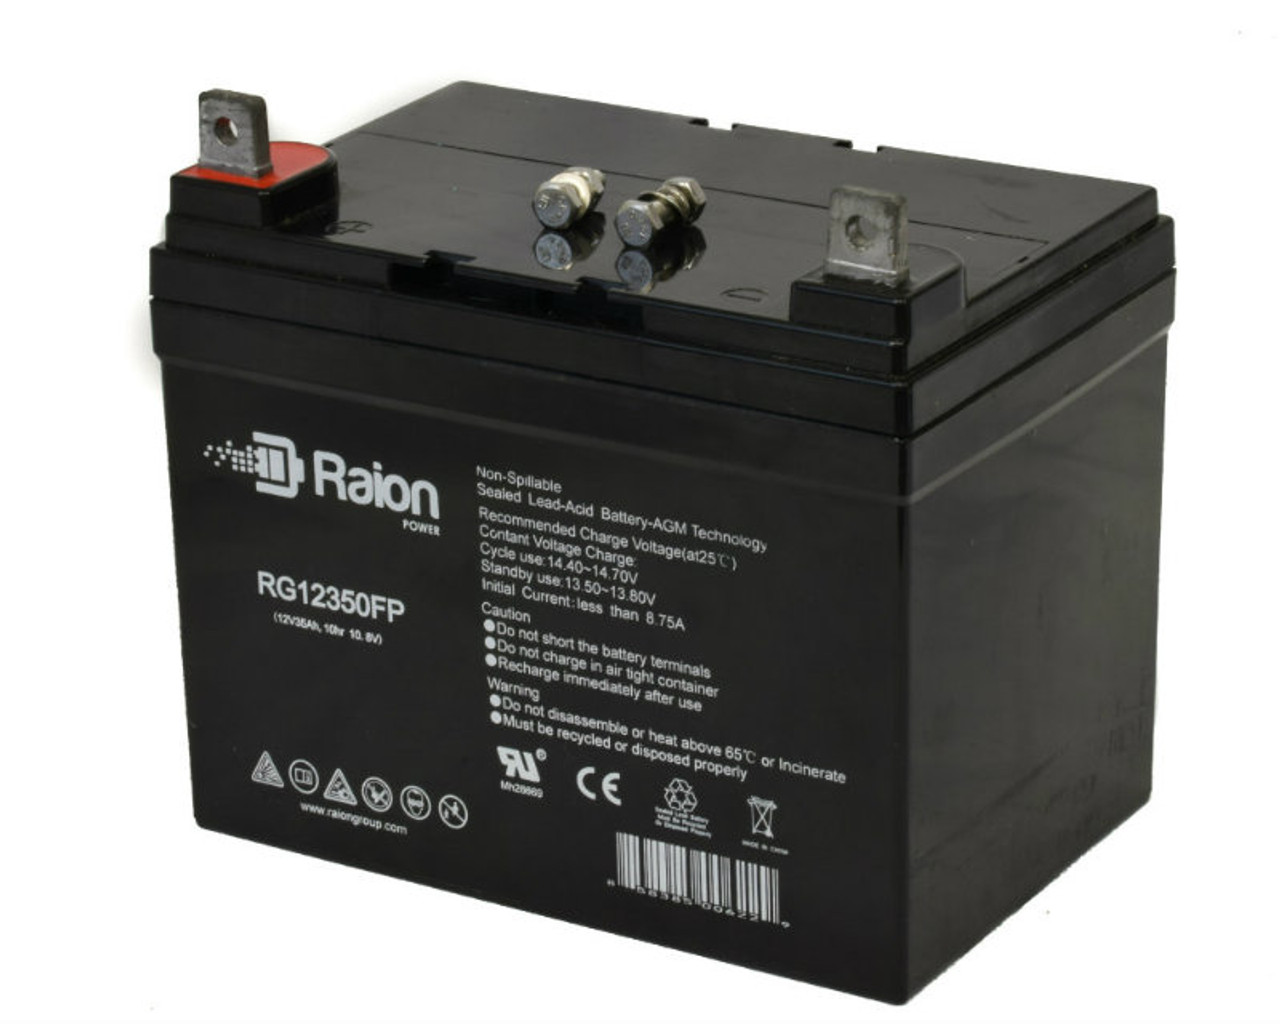 Raion Power Replacement 12V 35Ah RG12350FP Mobility Scooter Battery for A-Bec Targa 14 Inch